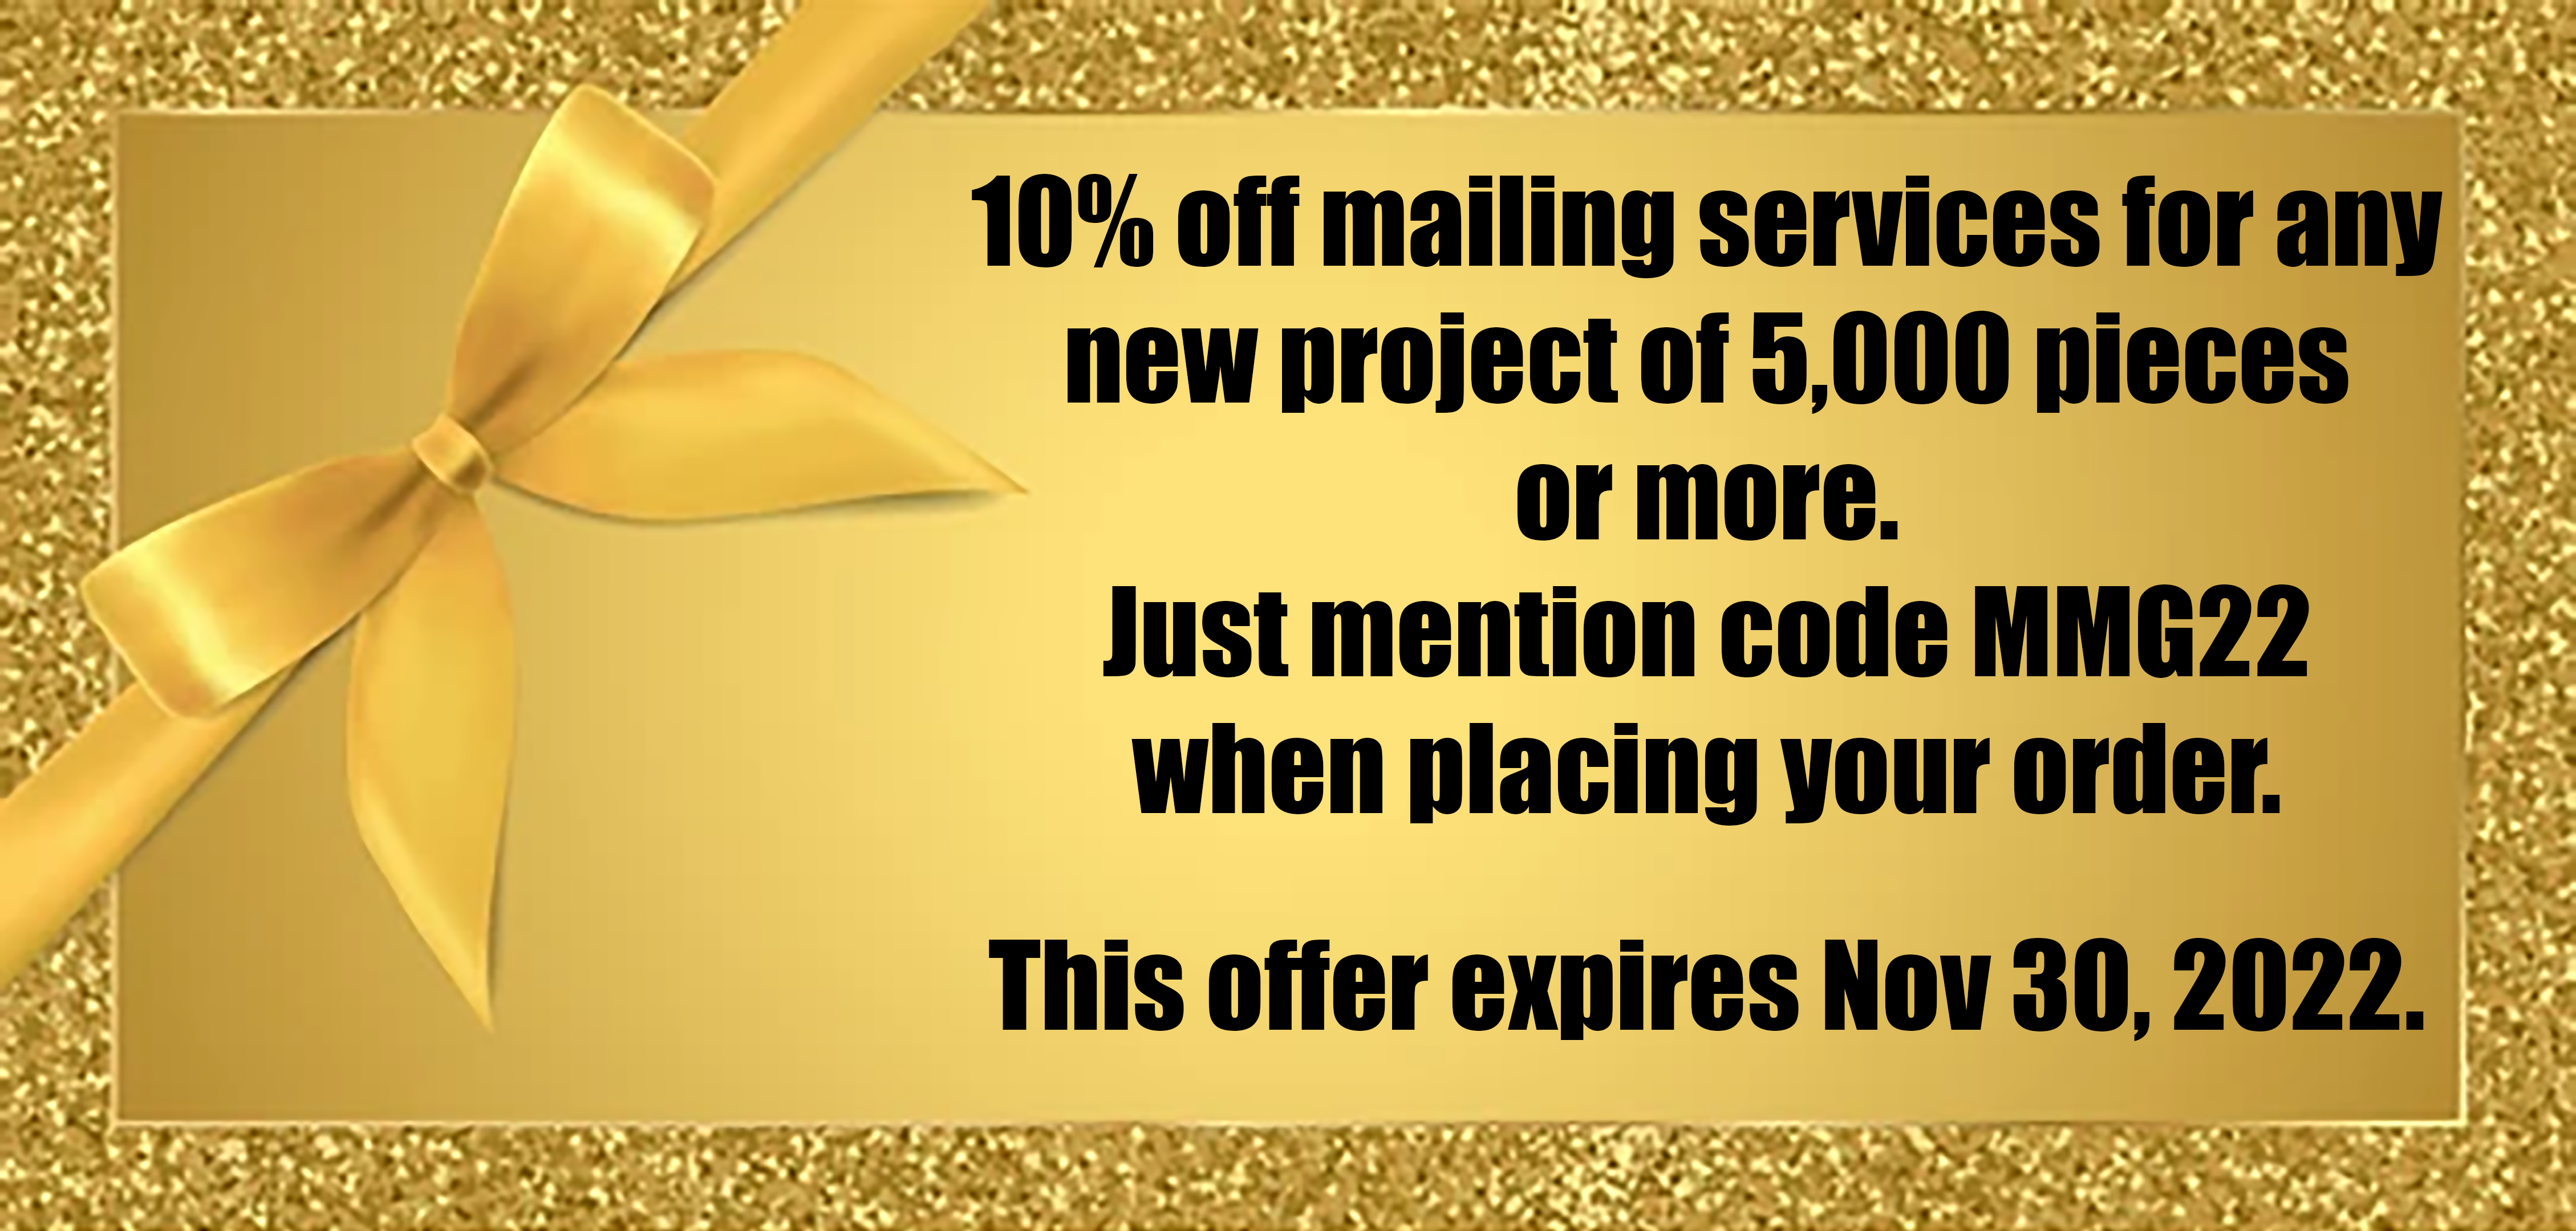 10% Off Mailing Services for Any New Project of 5000 pieces or more coupon. Mention MMG22 when ordering. Expires 11/30/22.